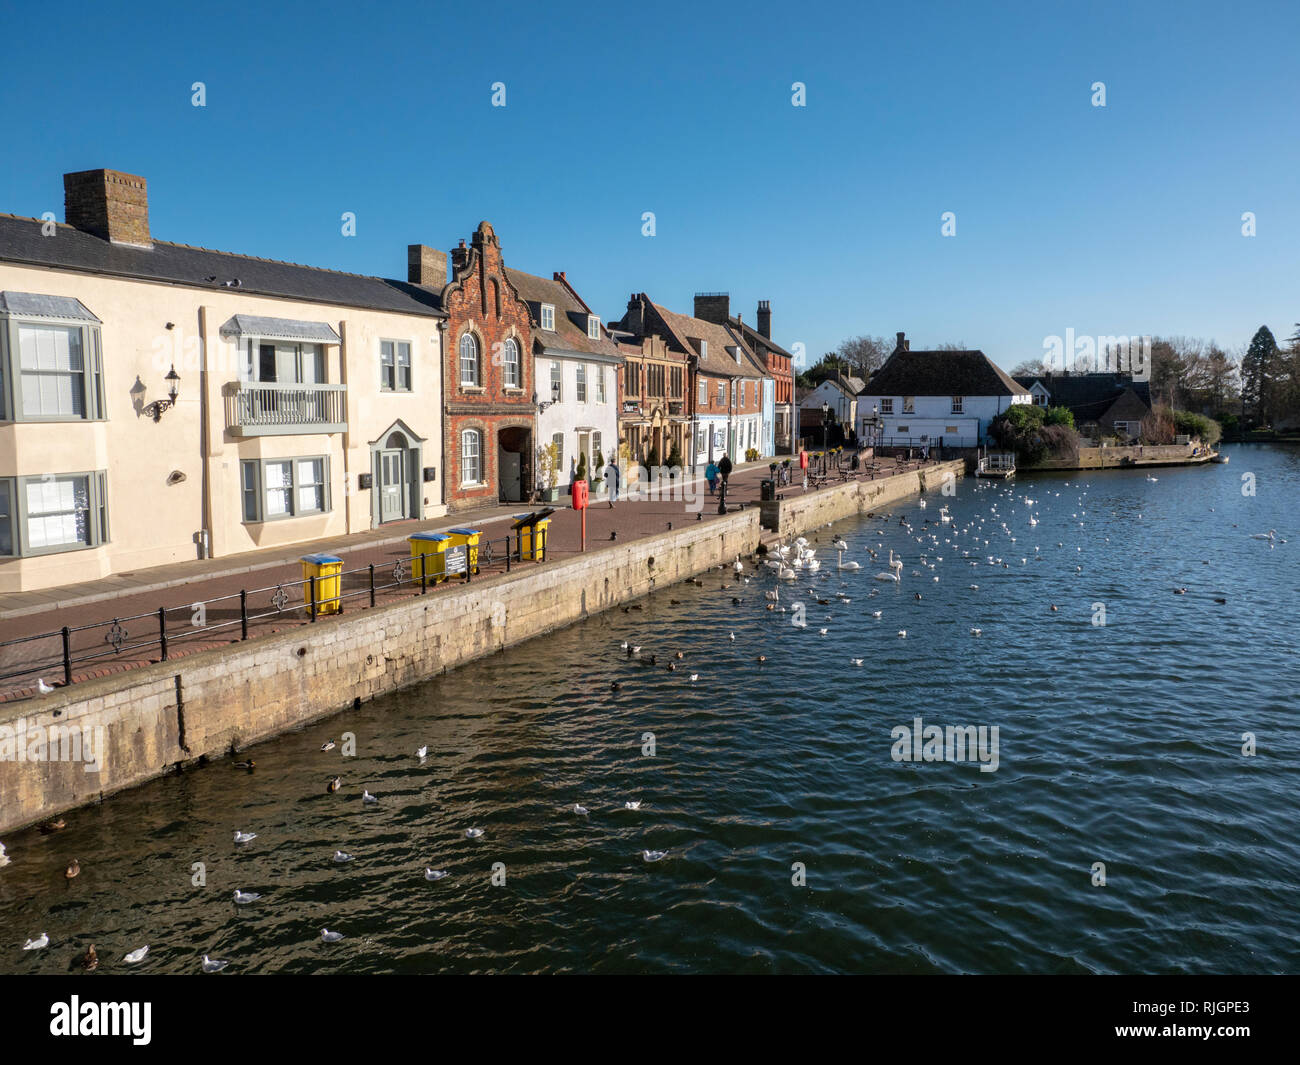 The Quay at the Old Riverport in the market town of St Ives Cambridgeshire UK on a sunny winter day Stock Photo